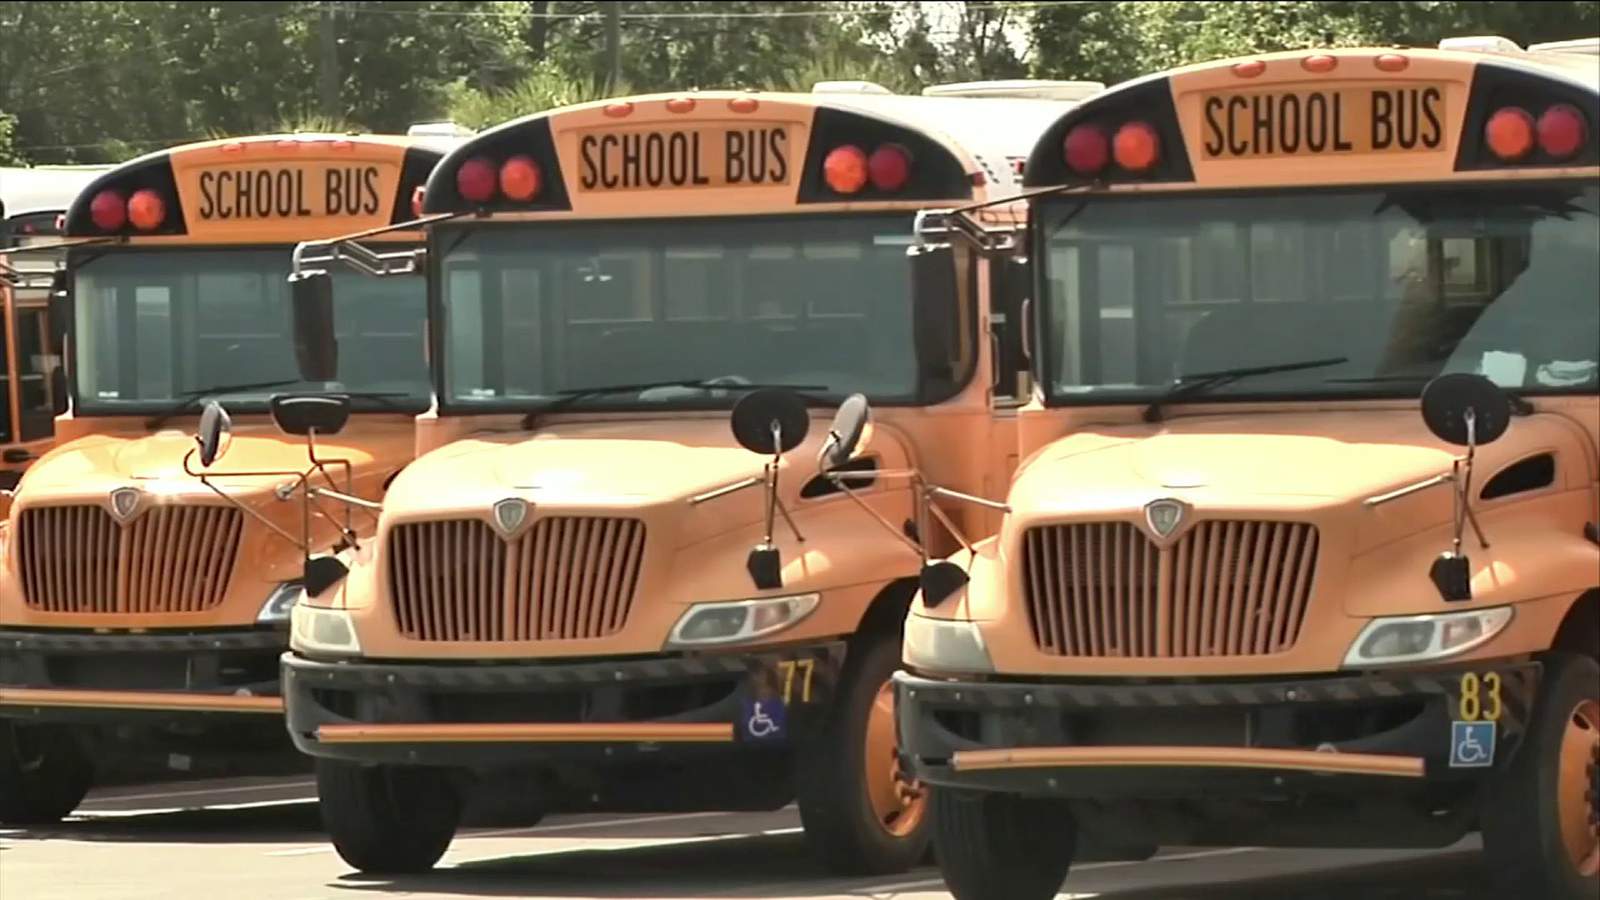 New year brings higher fines for drivers ignoring school bus stops